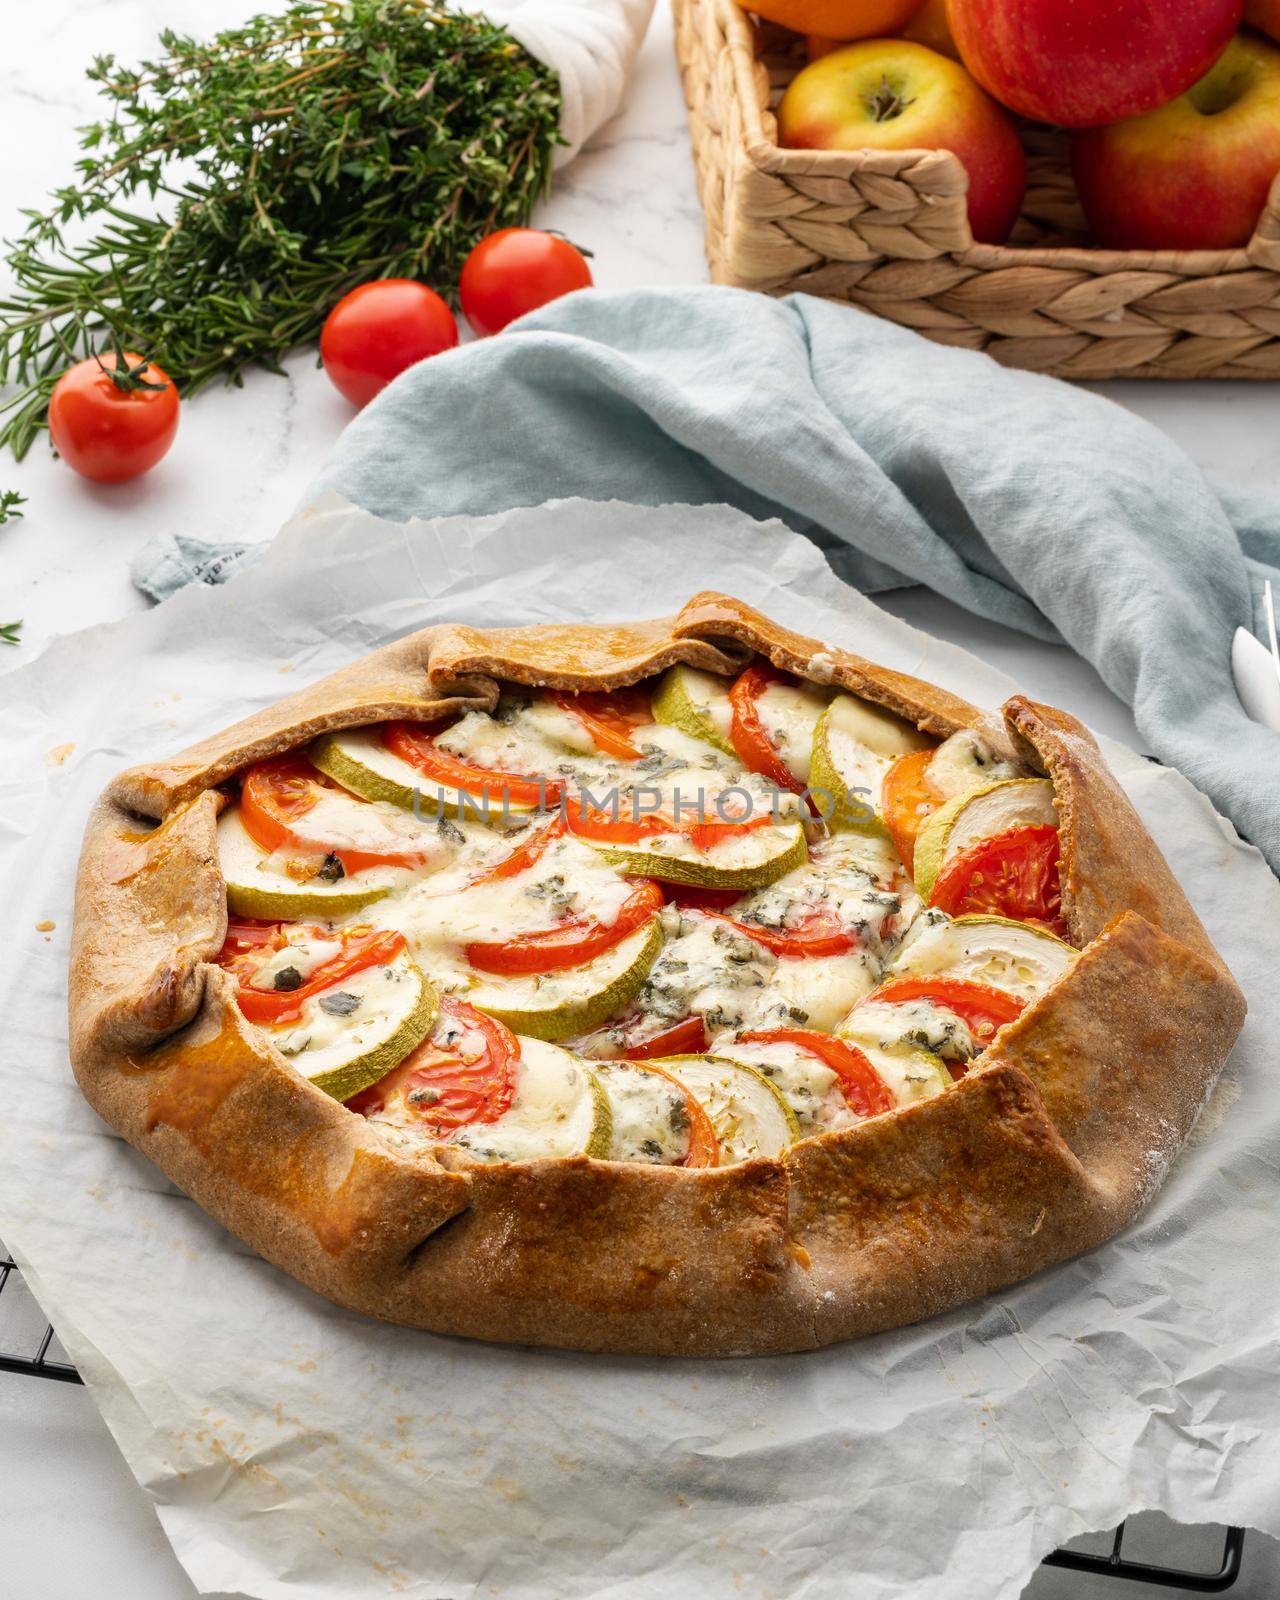 Homemade savory galette with vegetables, wholegrain pie with tomatoes, zucchini, blue cheese by NataBene